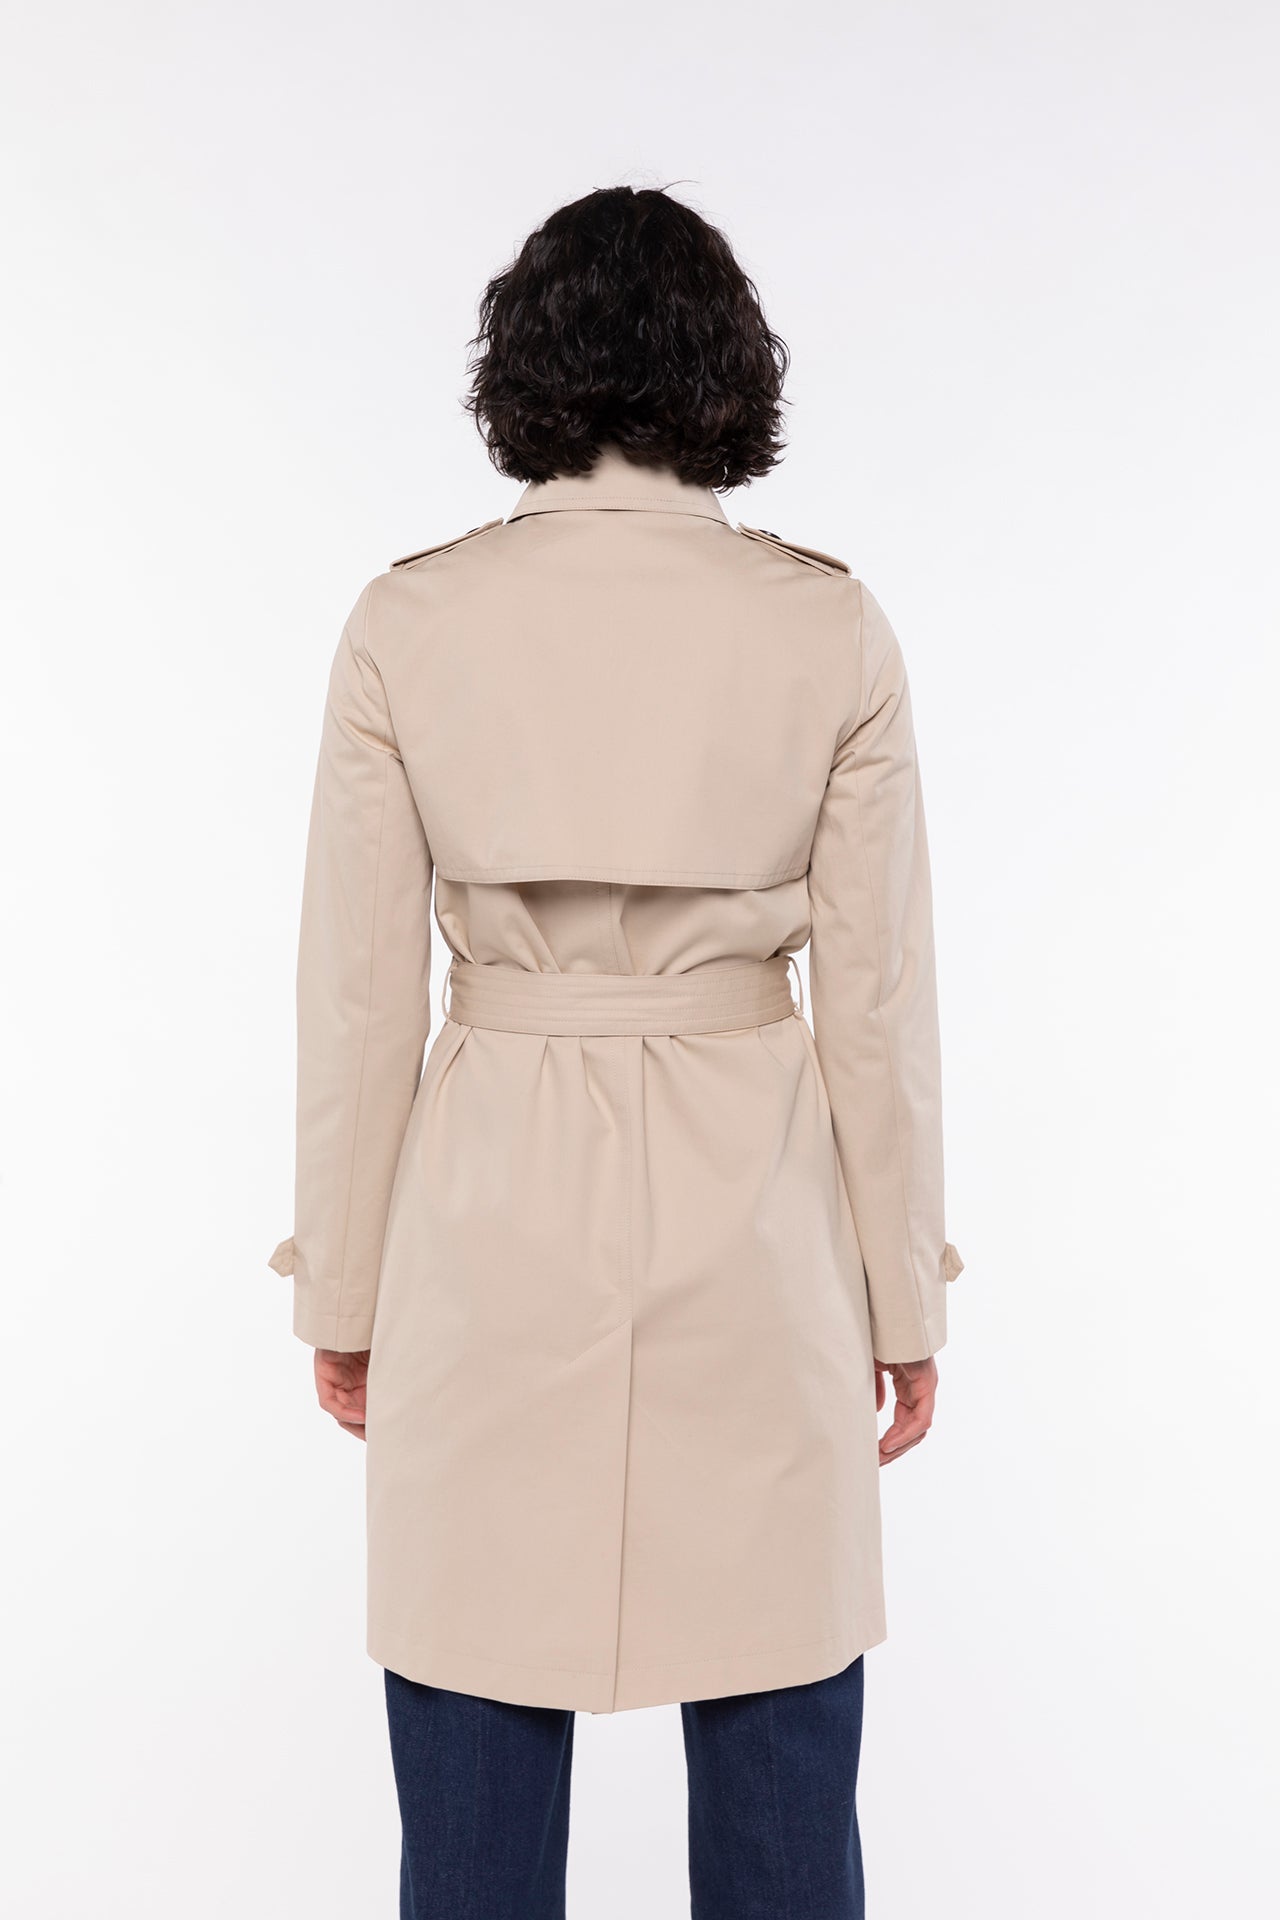 CHAMAS Trench-Authentic trench in pure beige cotton